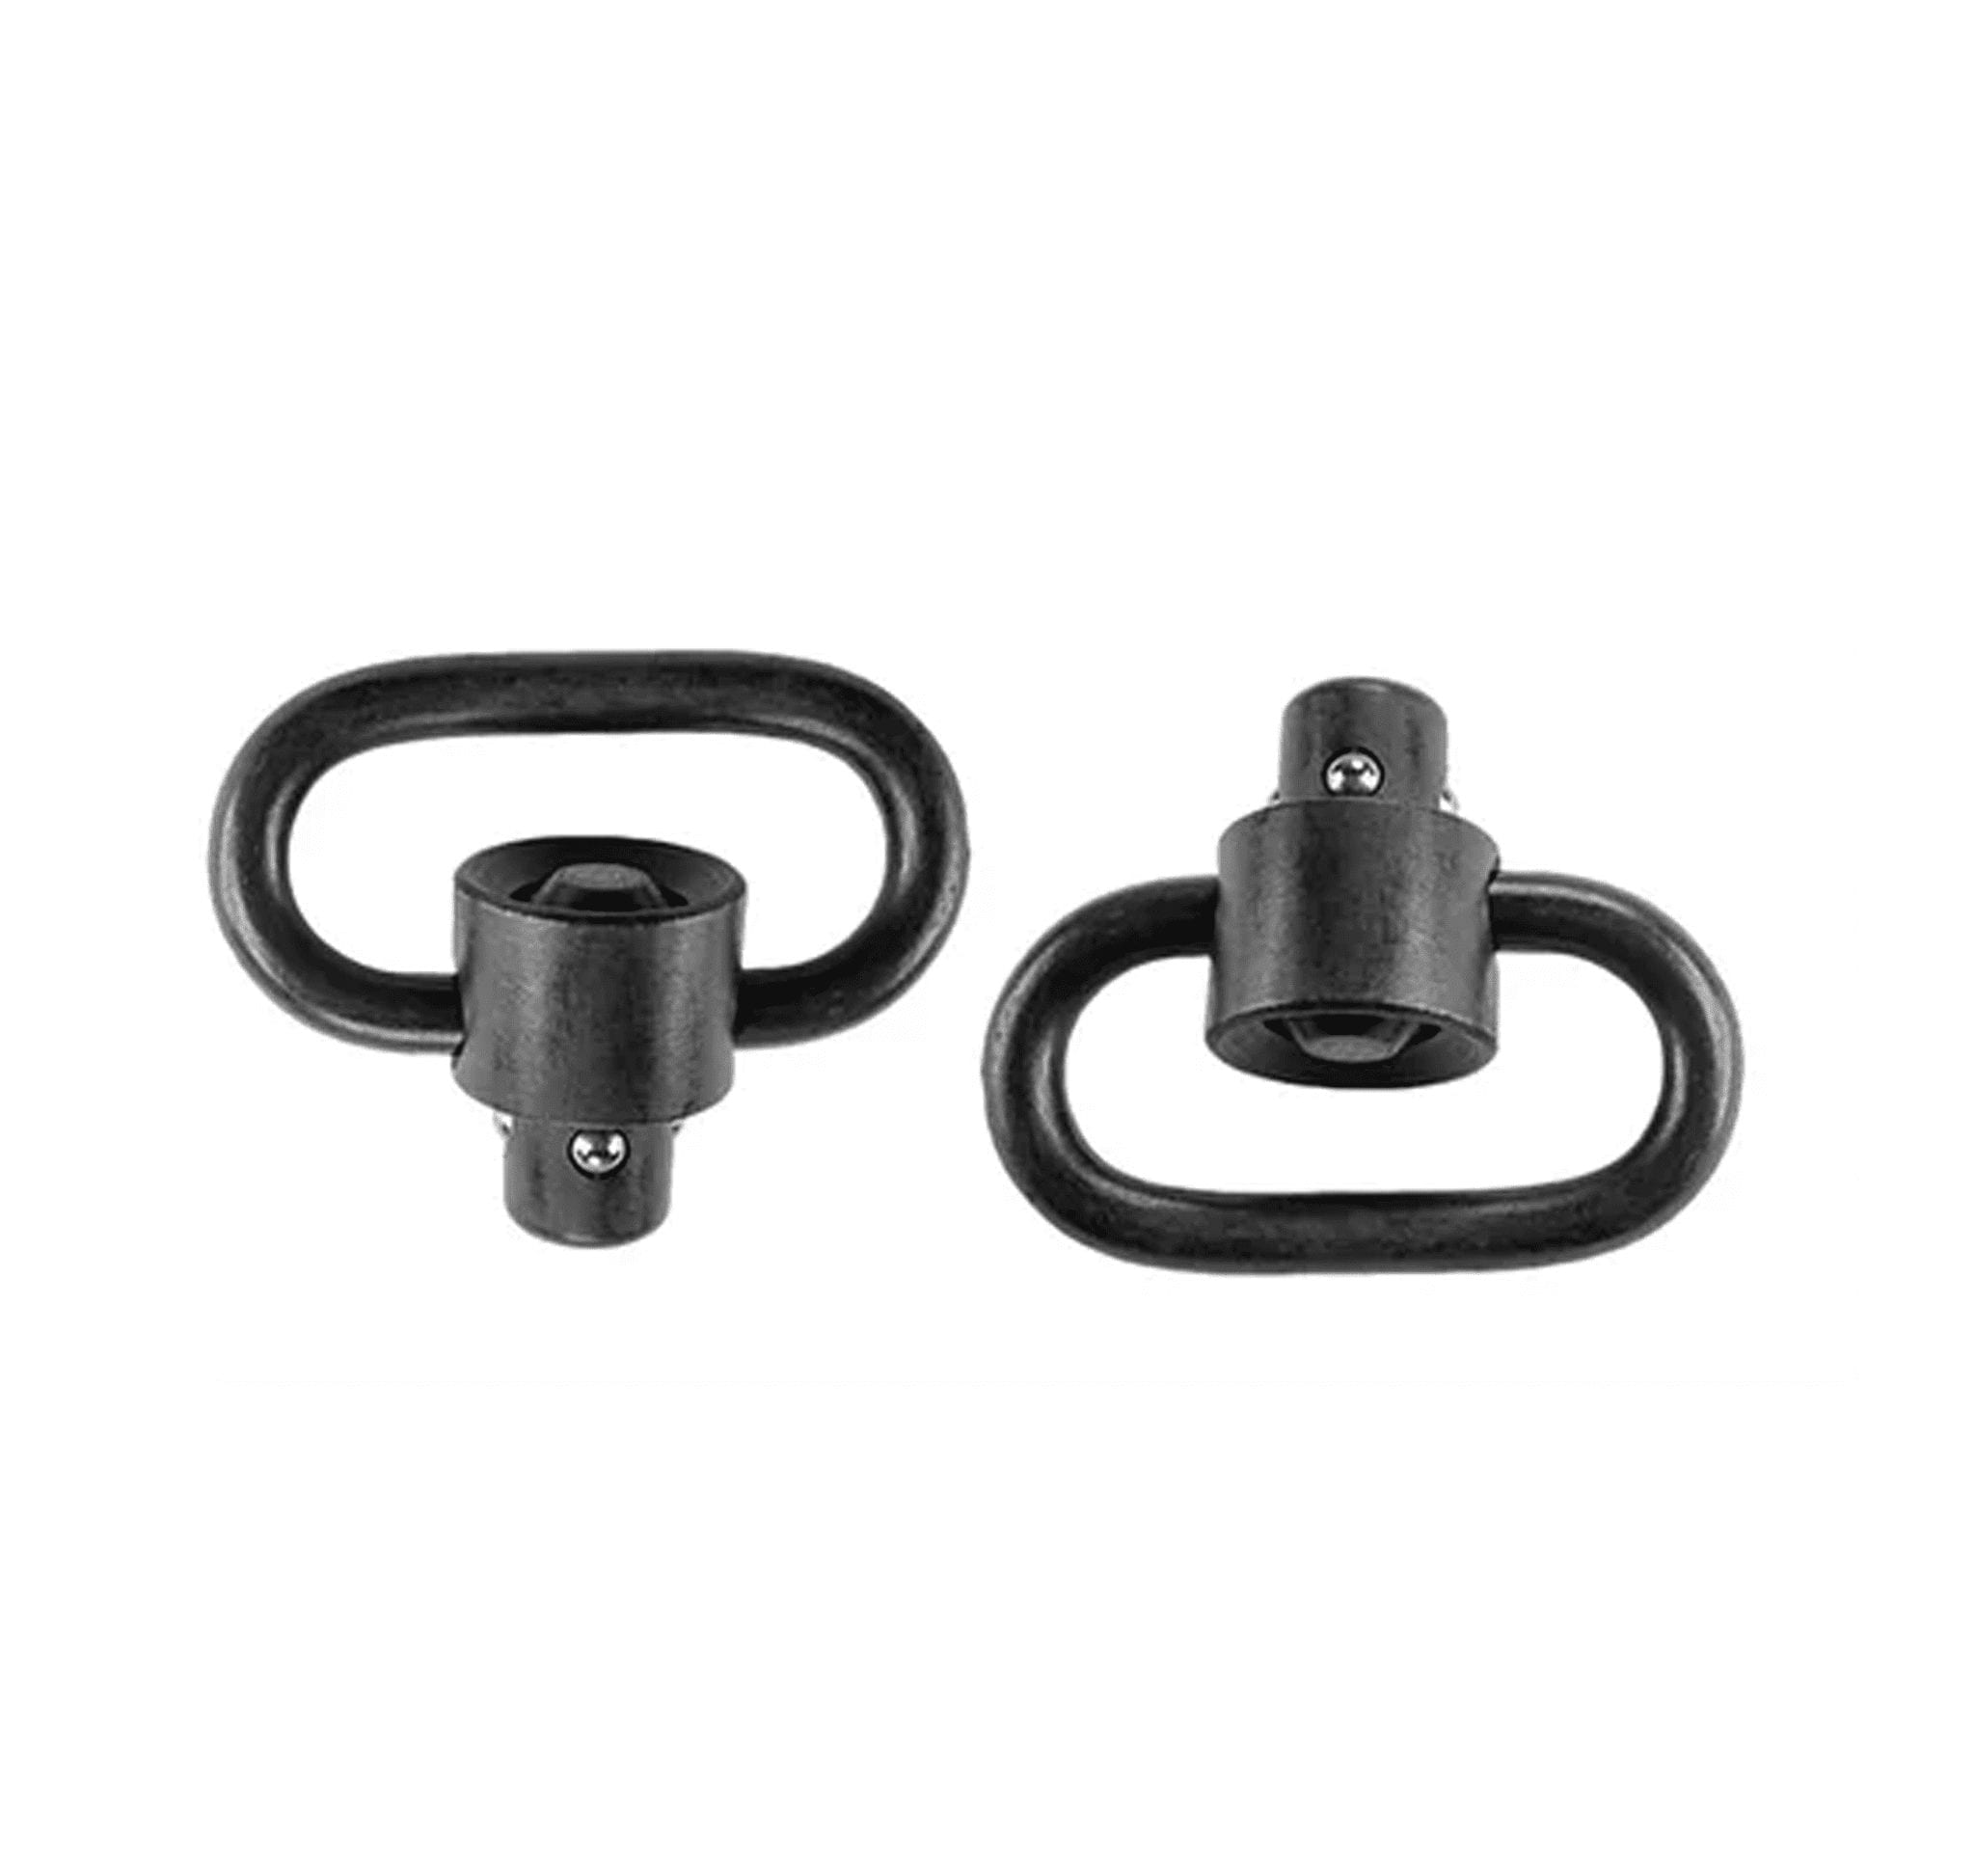 Recessed Plunger HD Swivels – 2 PCS